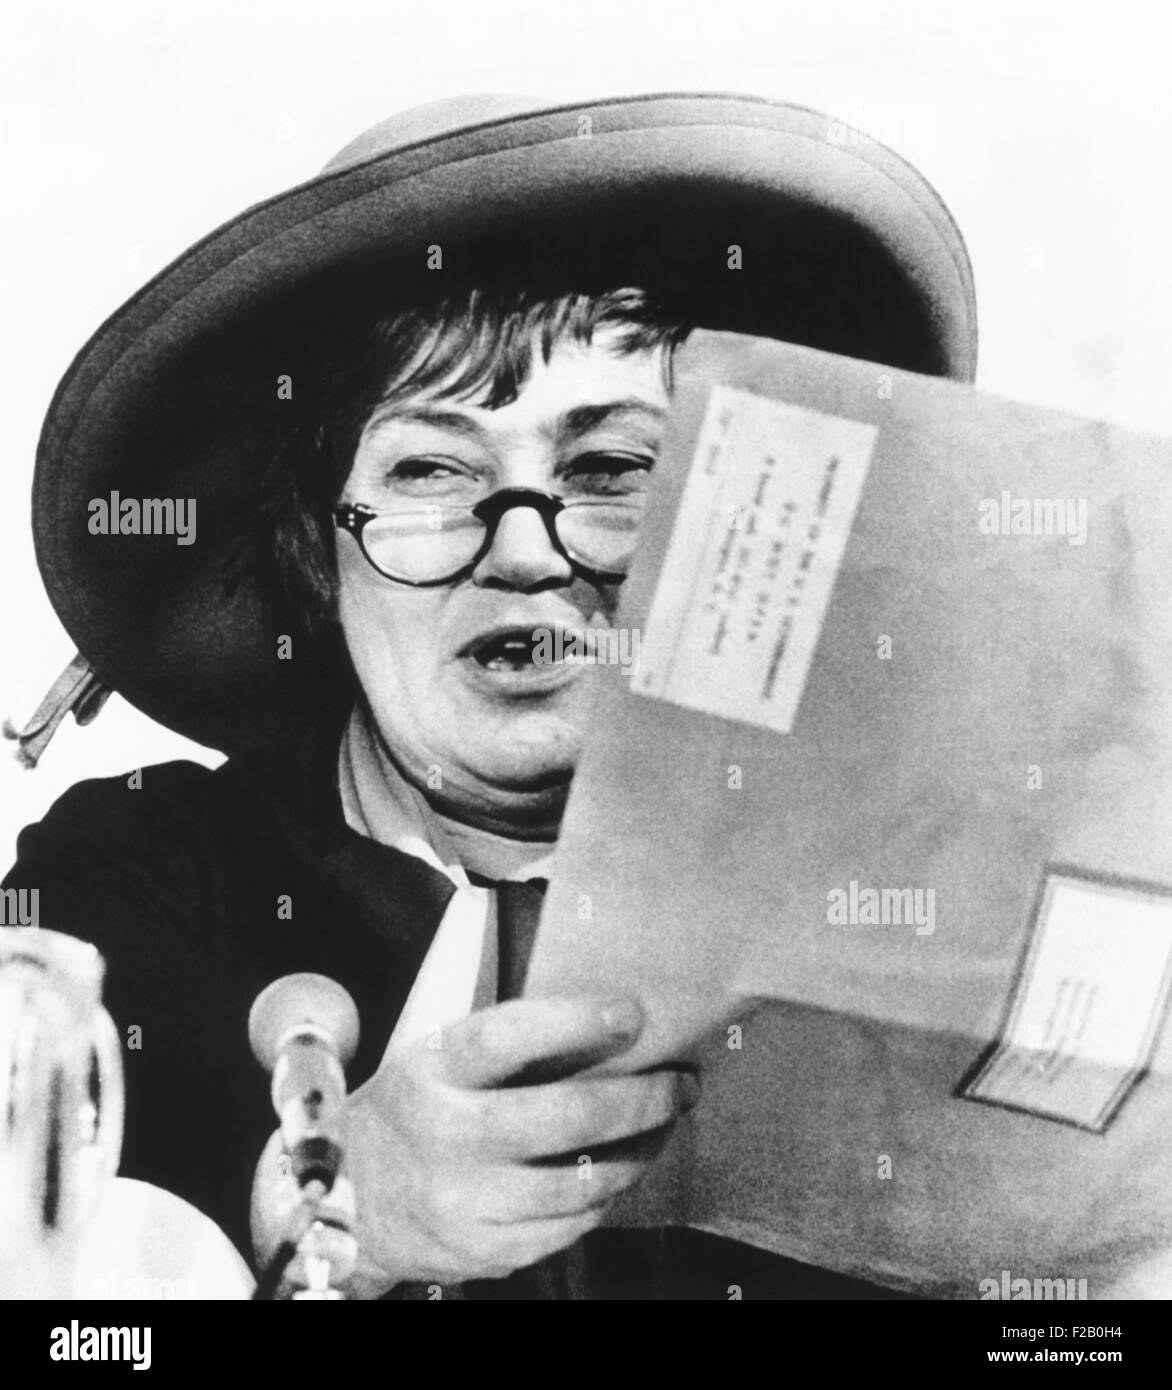 Congresswoman Bella Abzug held her CIA file, built since 1963, when she was a lawyer. March 5, 1975. At a House Committee hearing on privacy rights, she had an angry exchange with CIA Director William Colby. (CSU 2015 9 1115) Stock Photo